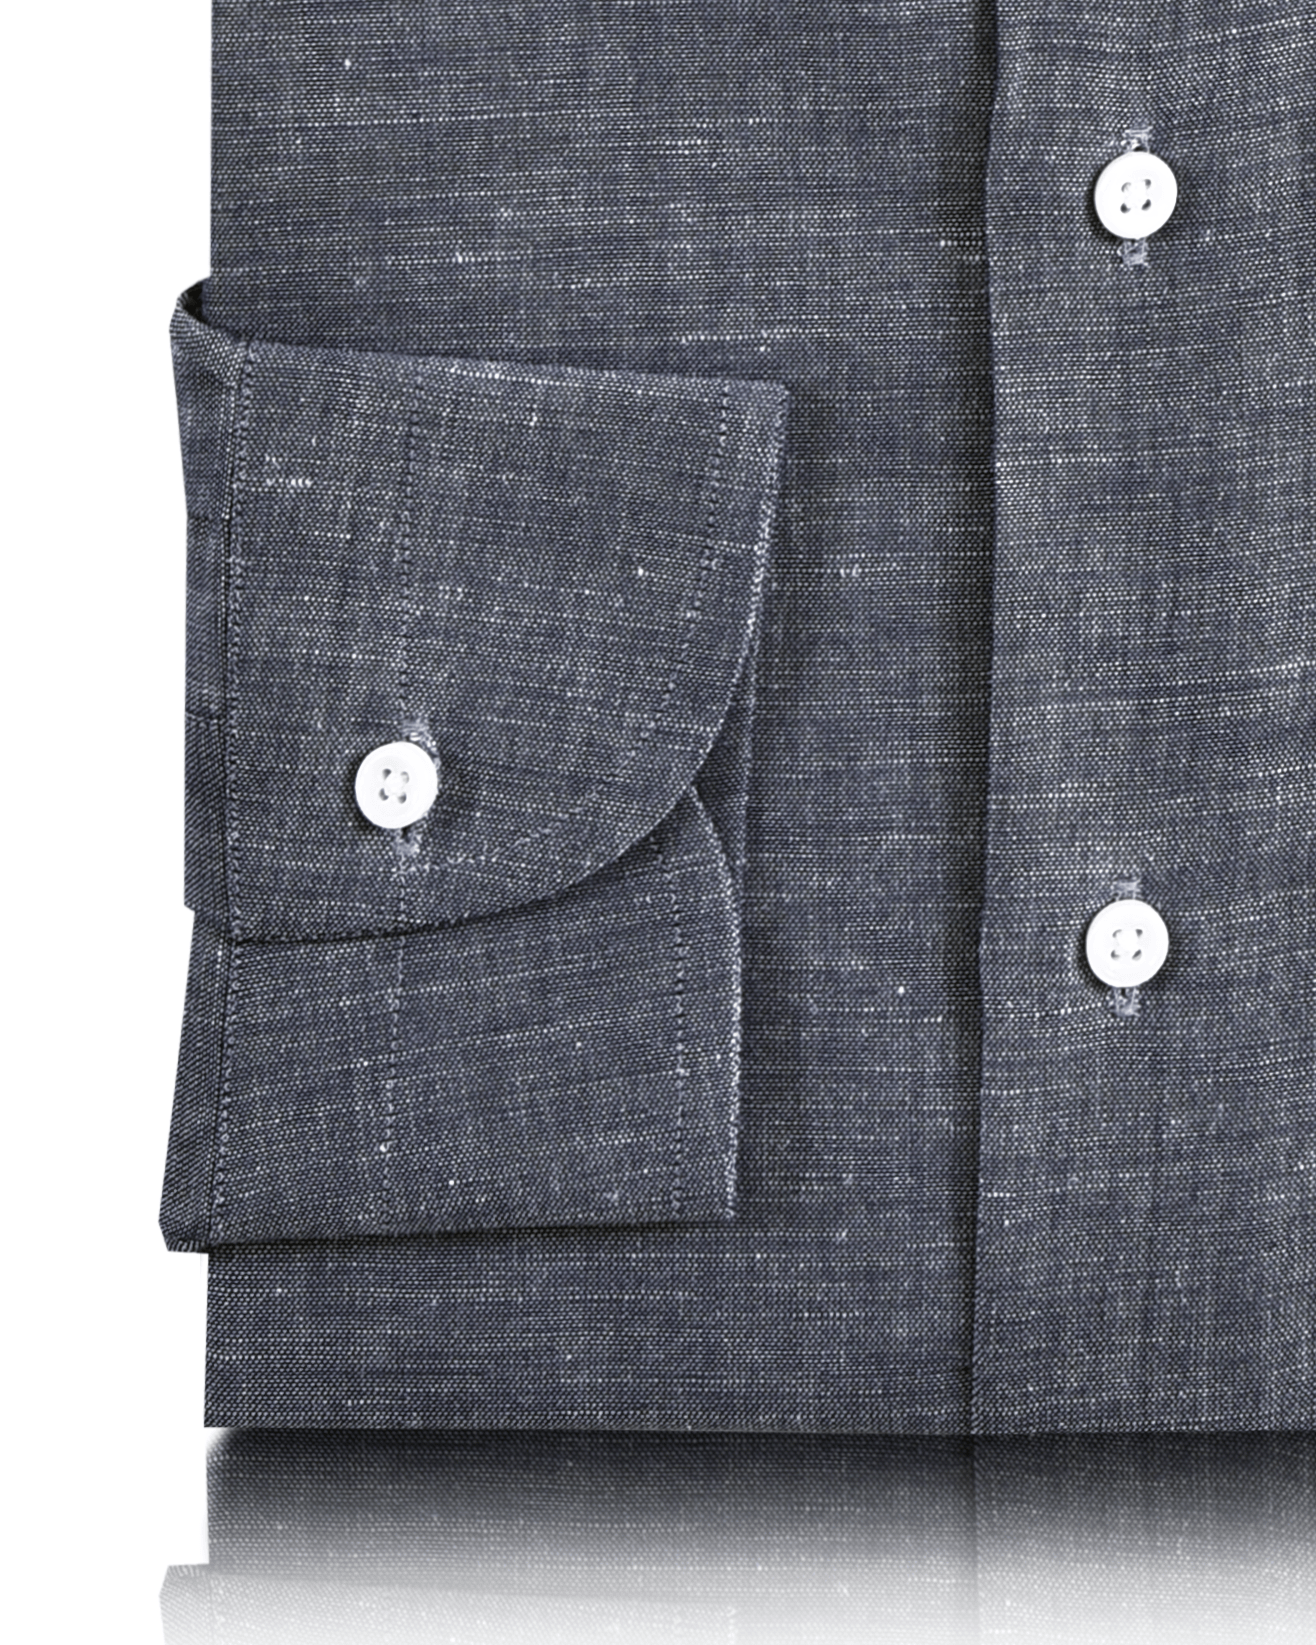 Cuff of the custom linen shirt for men in greyish navy by Luxire Clothing